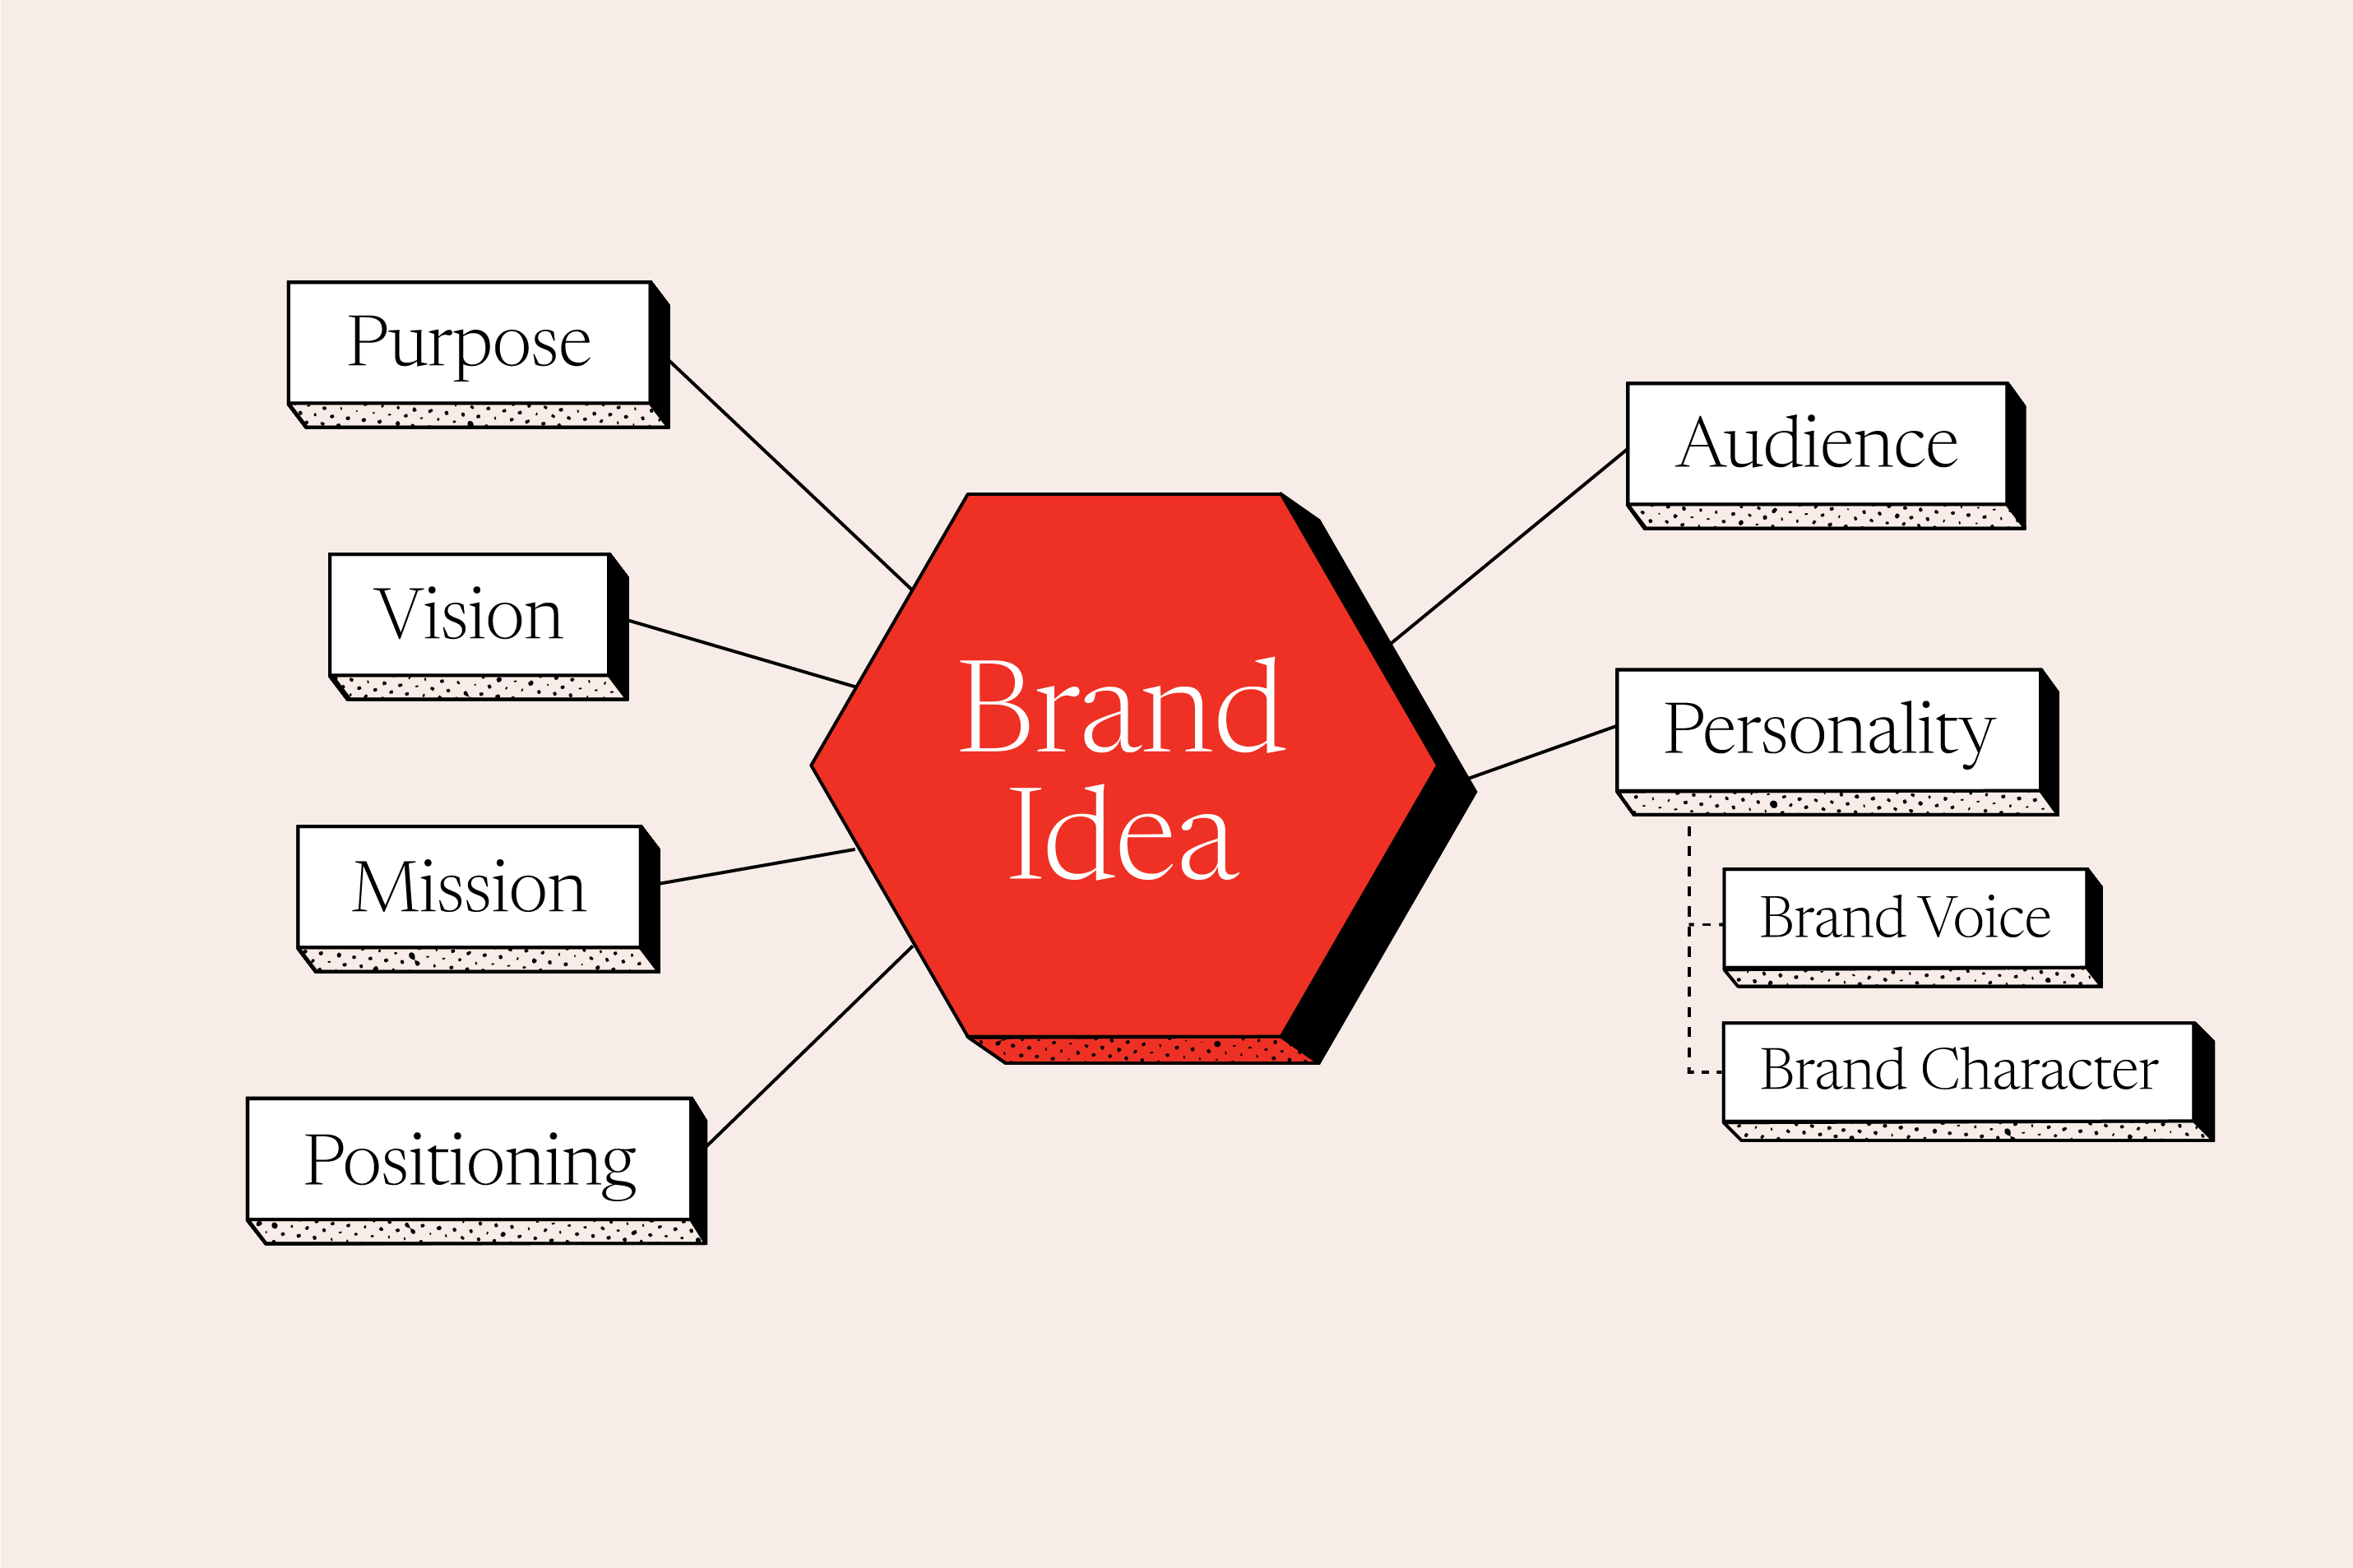 Brand Idea: Purpose, Vision, Mission, Positioning, Audience, Personality, Brand Voice, Brand Character